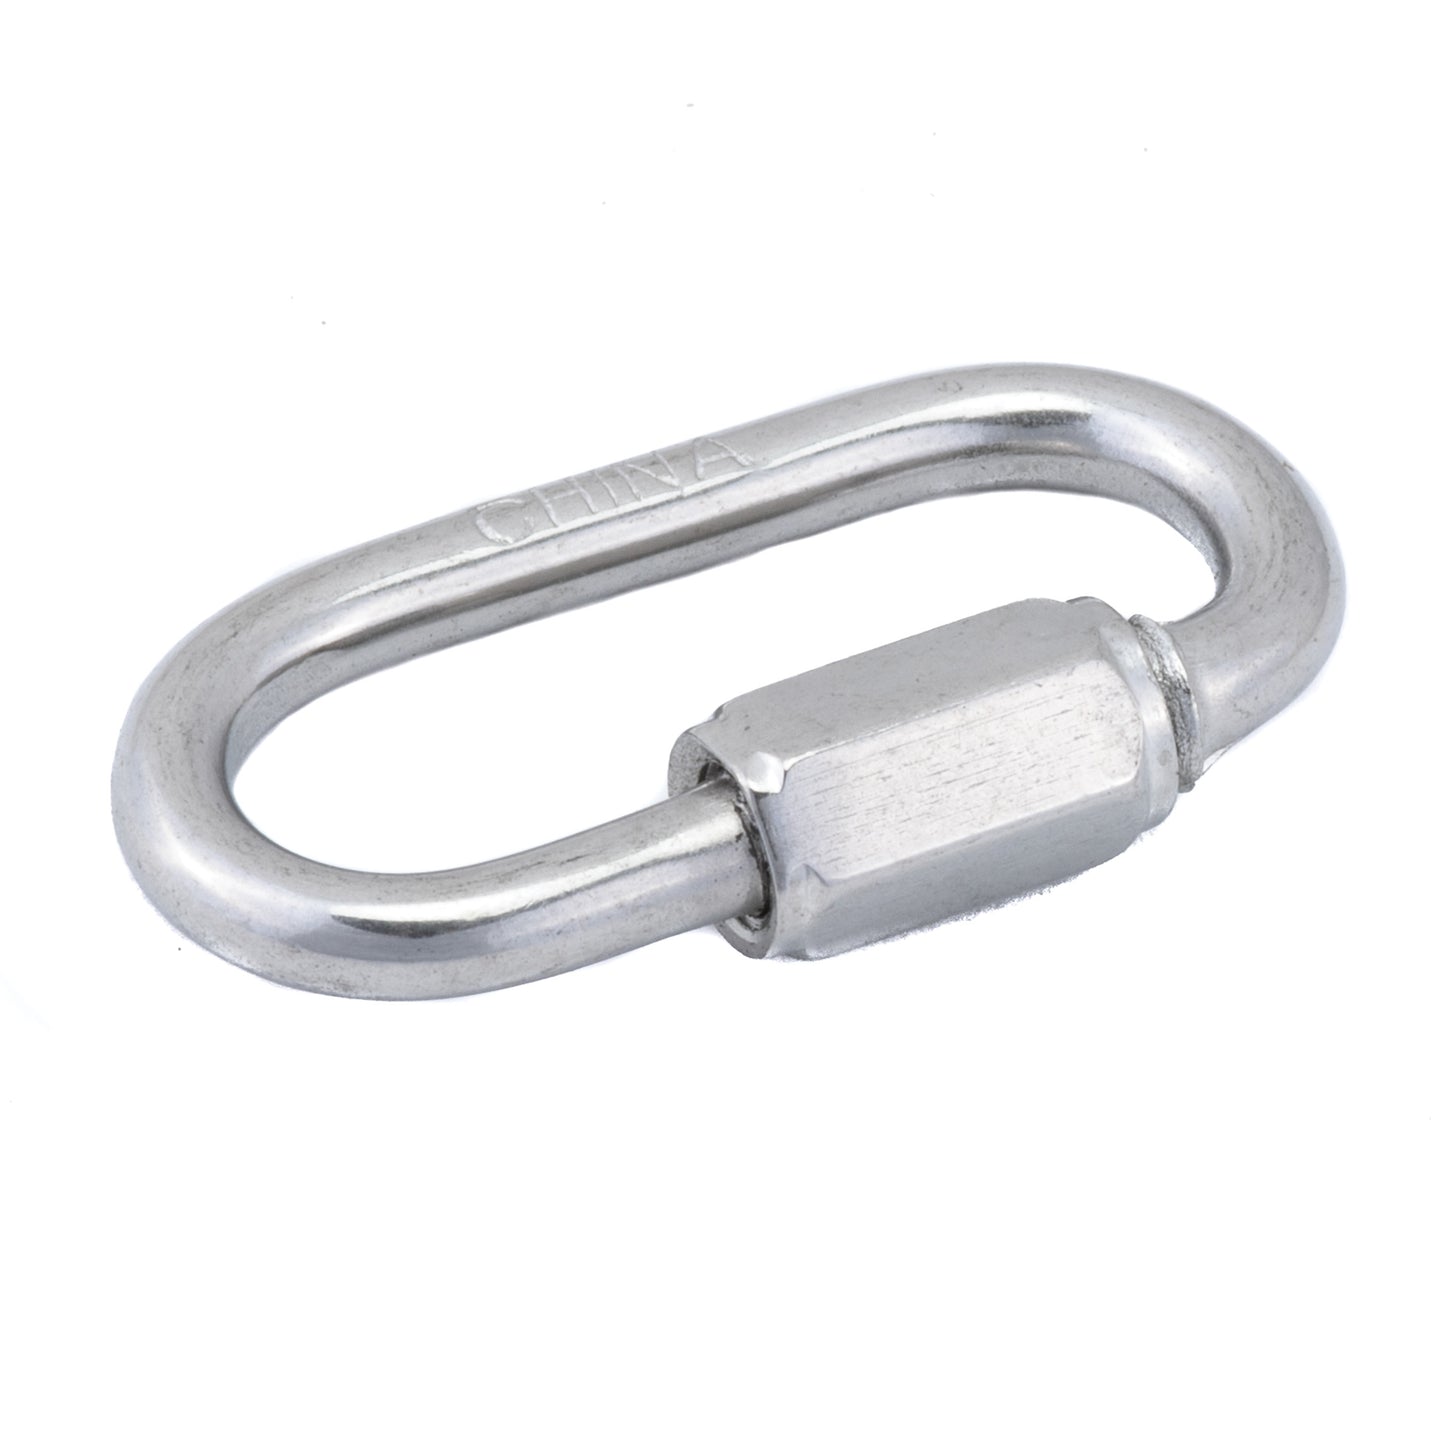 1-7/16" Stainless Steel Quick Link